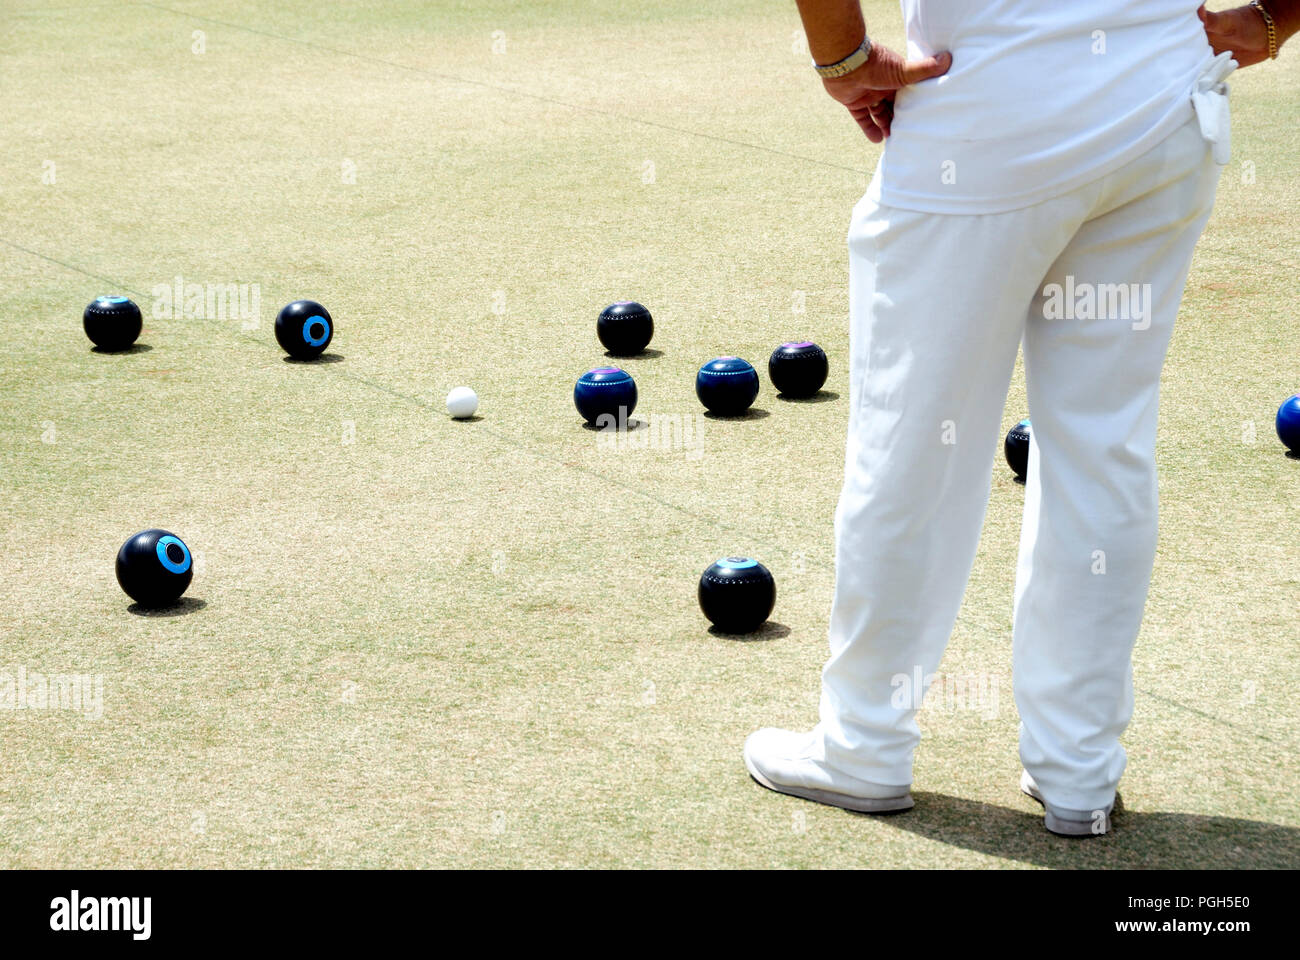 WUDINNA, AUSTRALIA-  FEBRUARY 02, 2018: People playing bowls on a bowling green in Australia Stock Photo